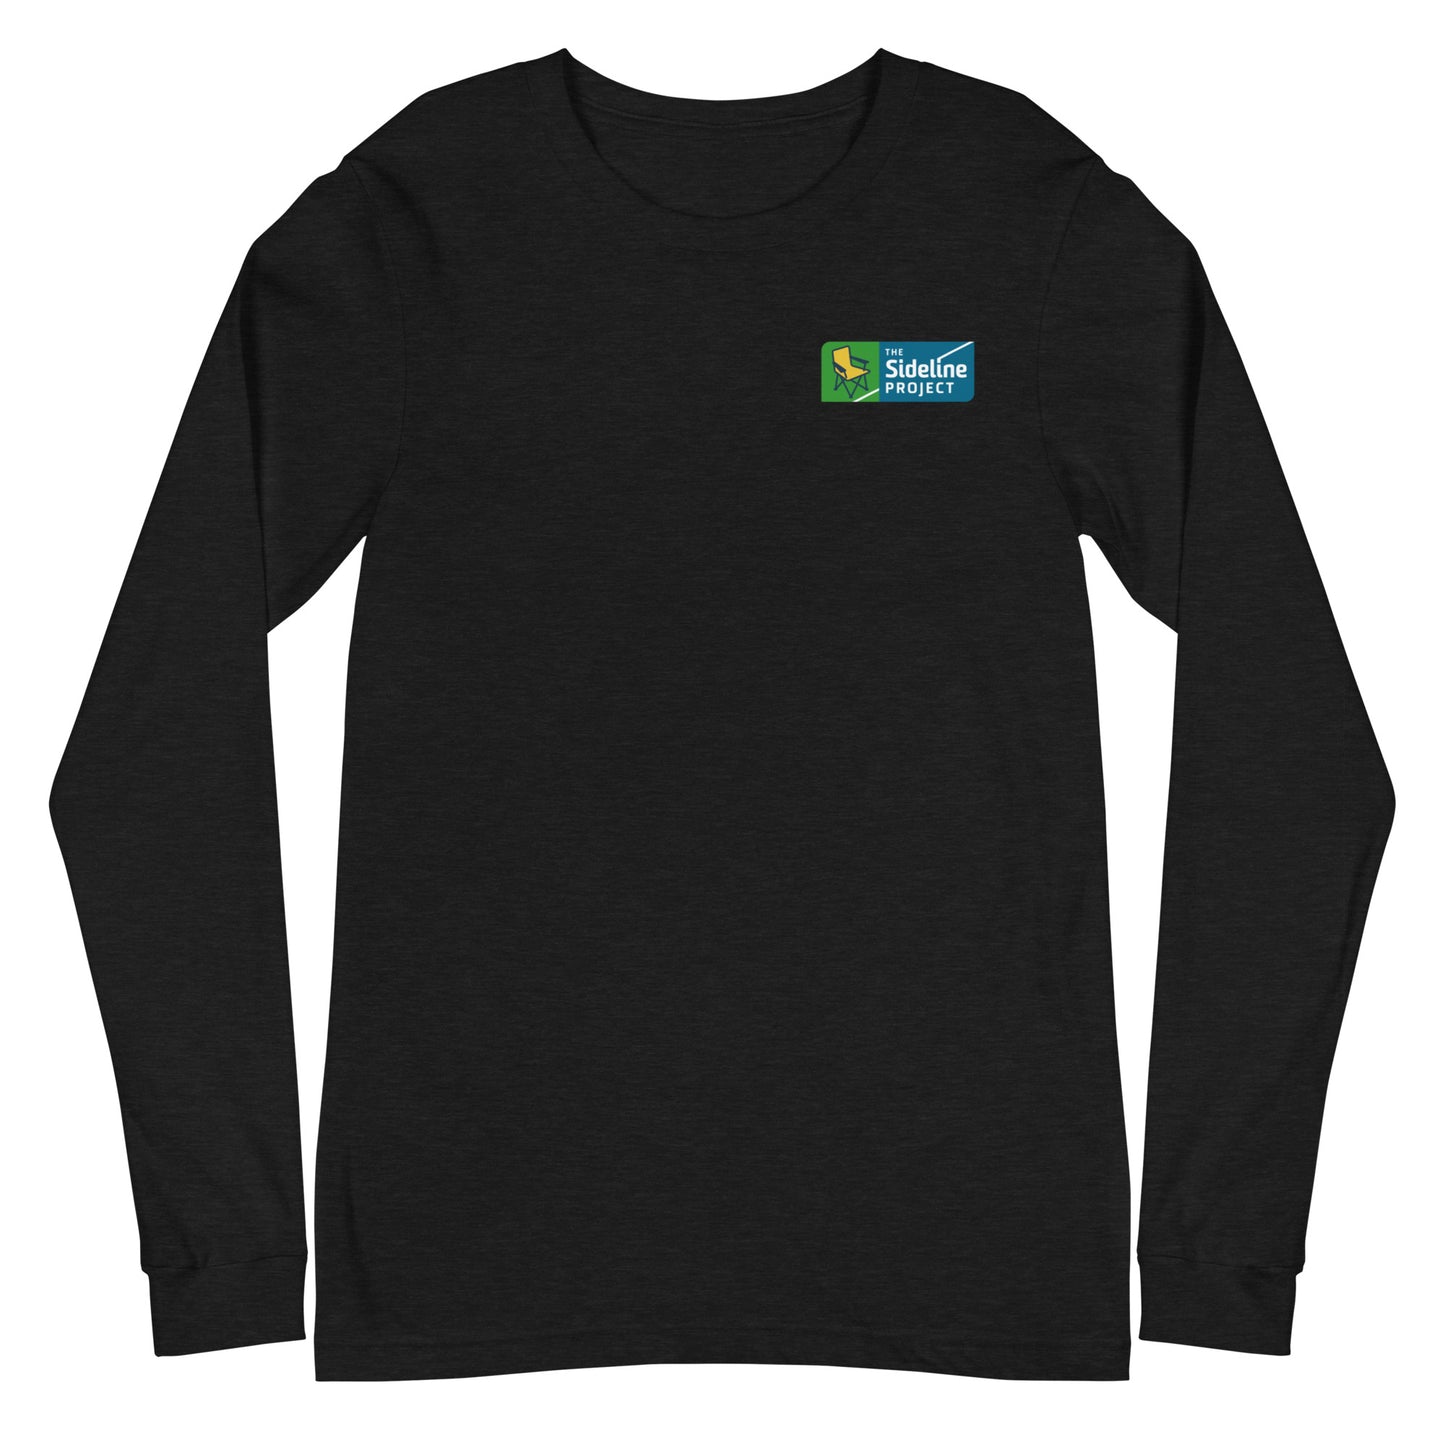 The Sideline Project Unisex Long Sleeve T-Shirt